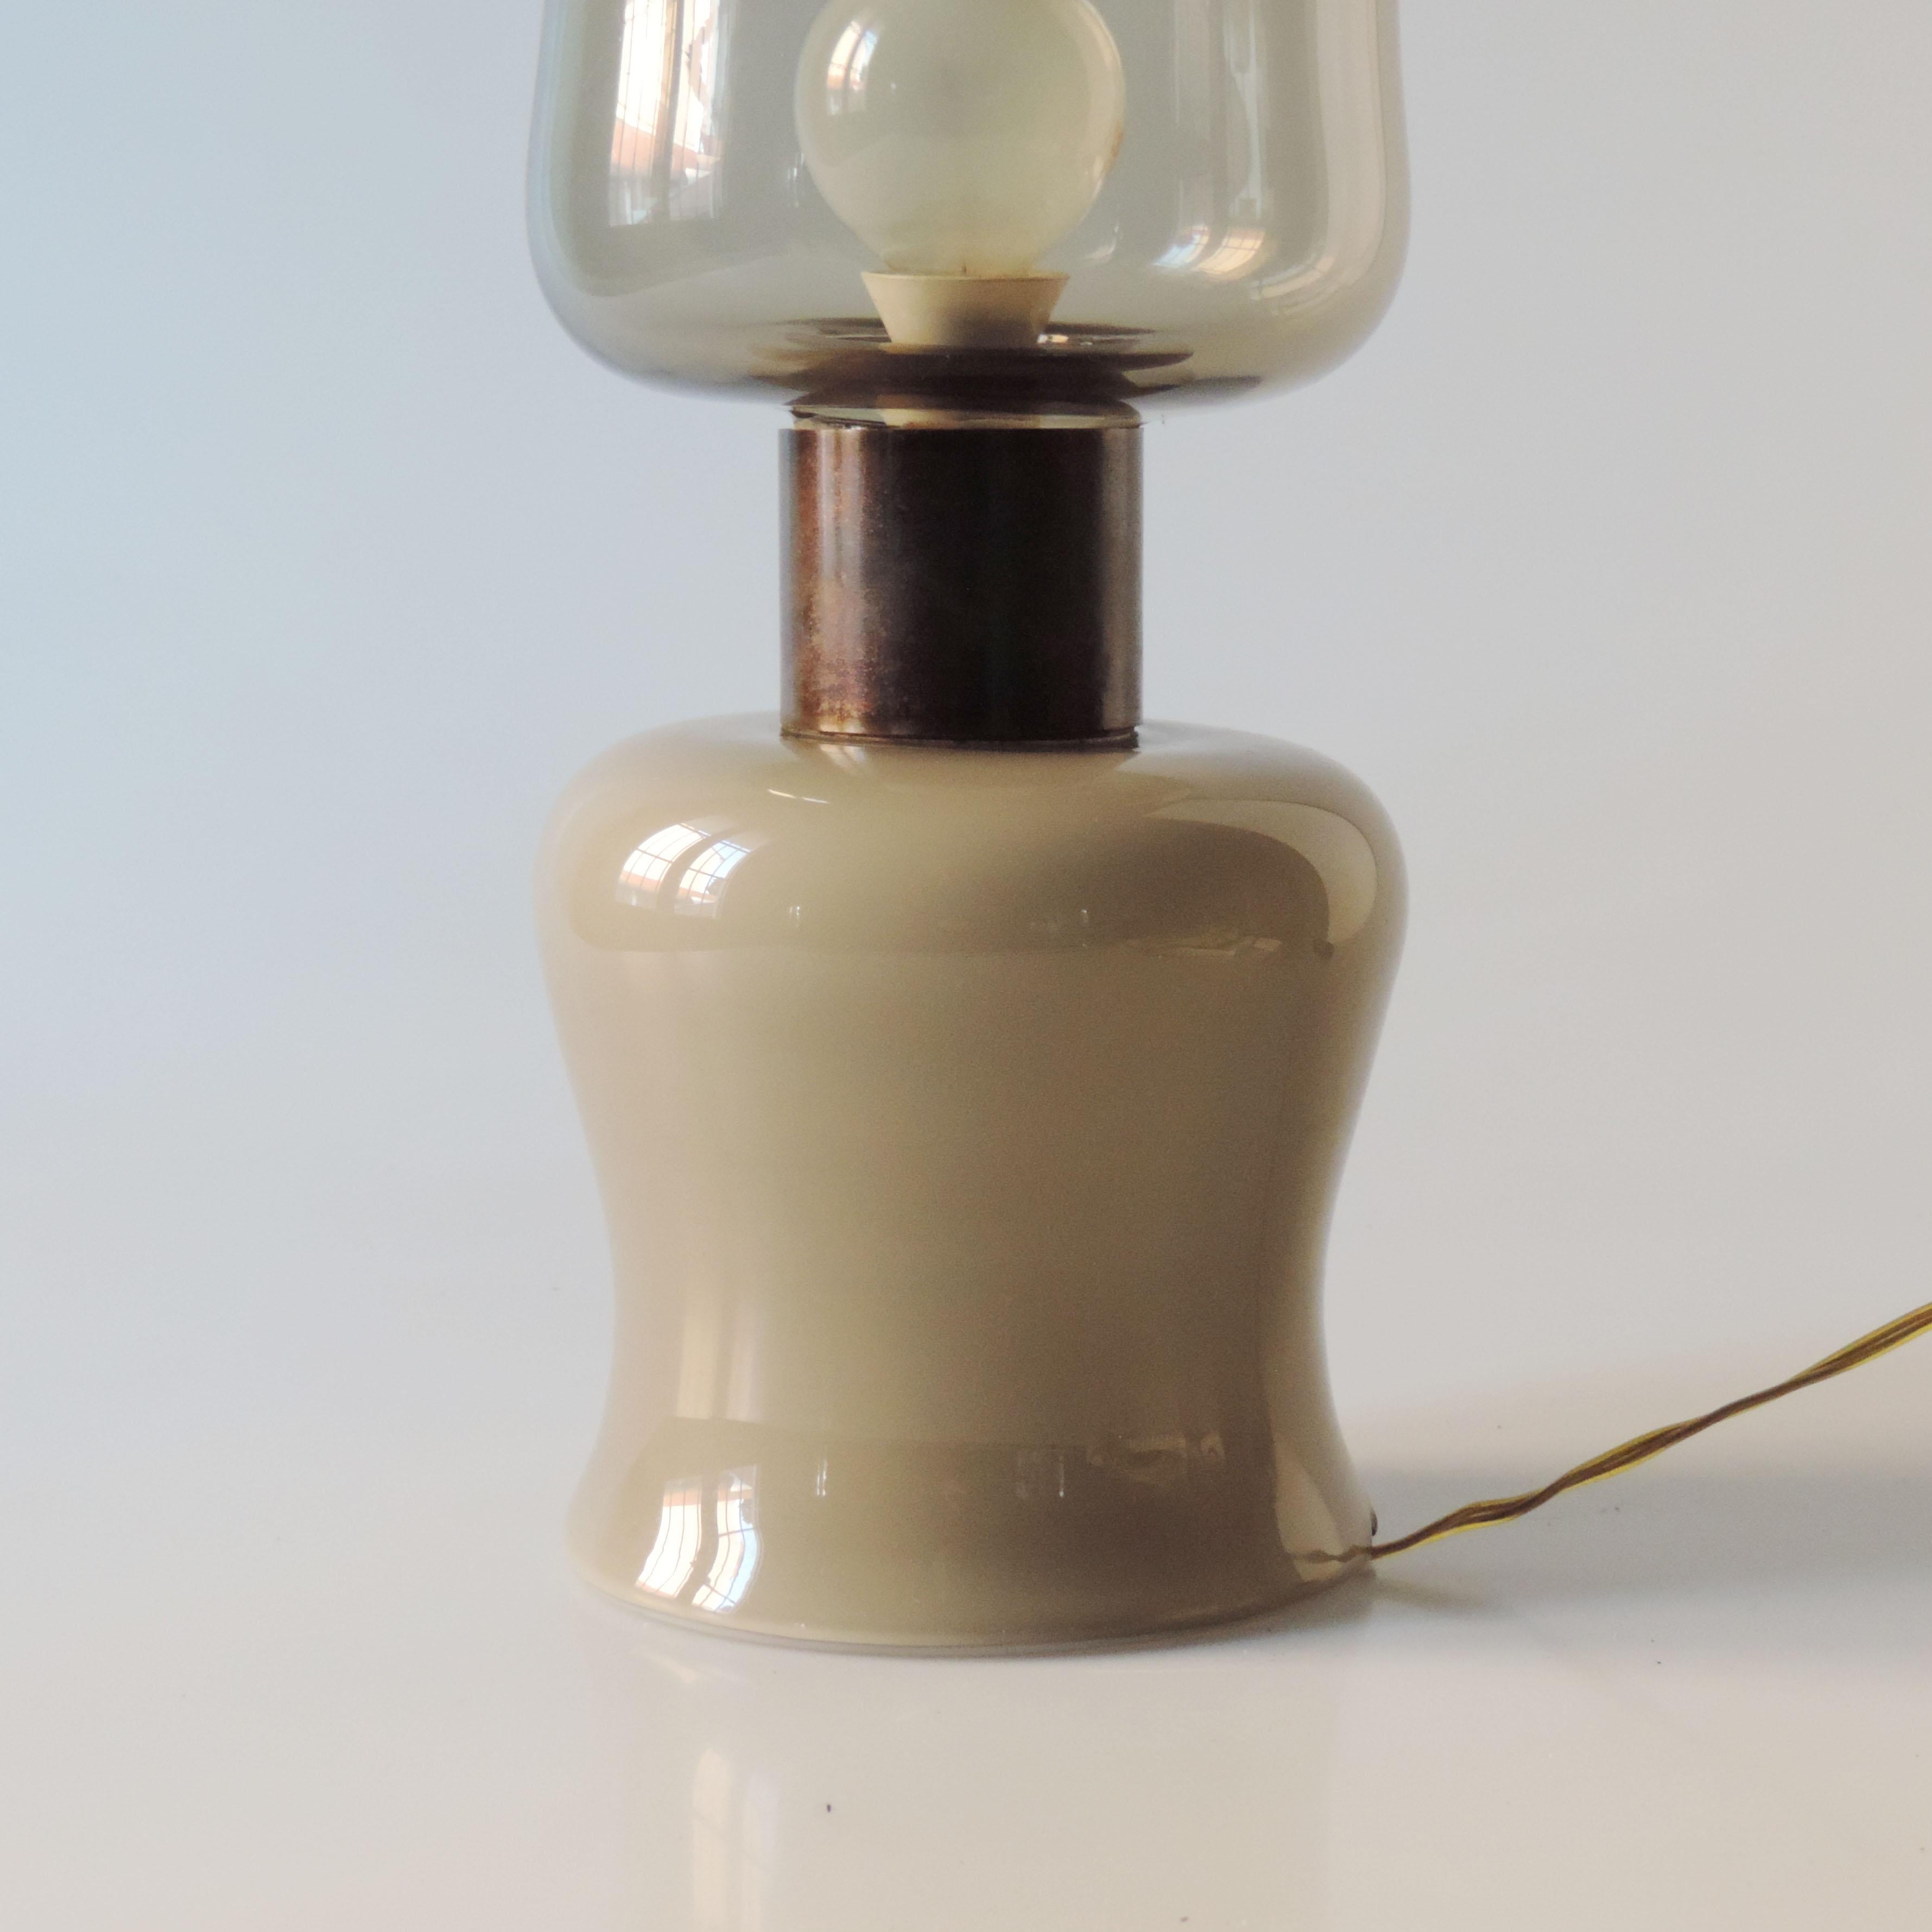 Italian 1958 Murano glass table lamp in light grey and light brown glass.
Bearing the label:
Arte Nuova Murano
Grand prize
World fair brussels 1958.